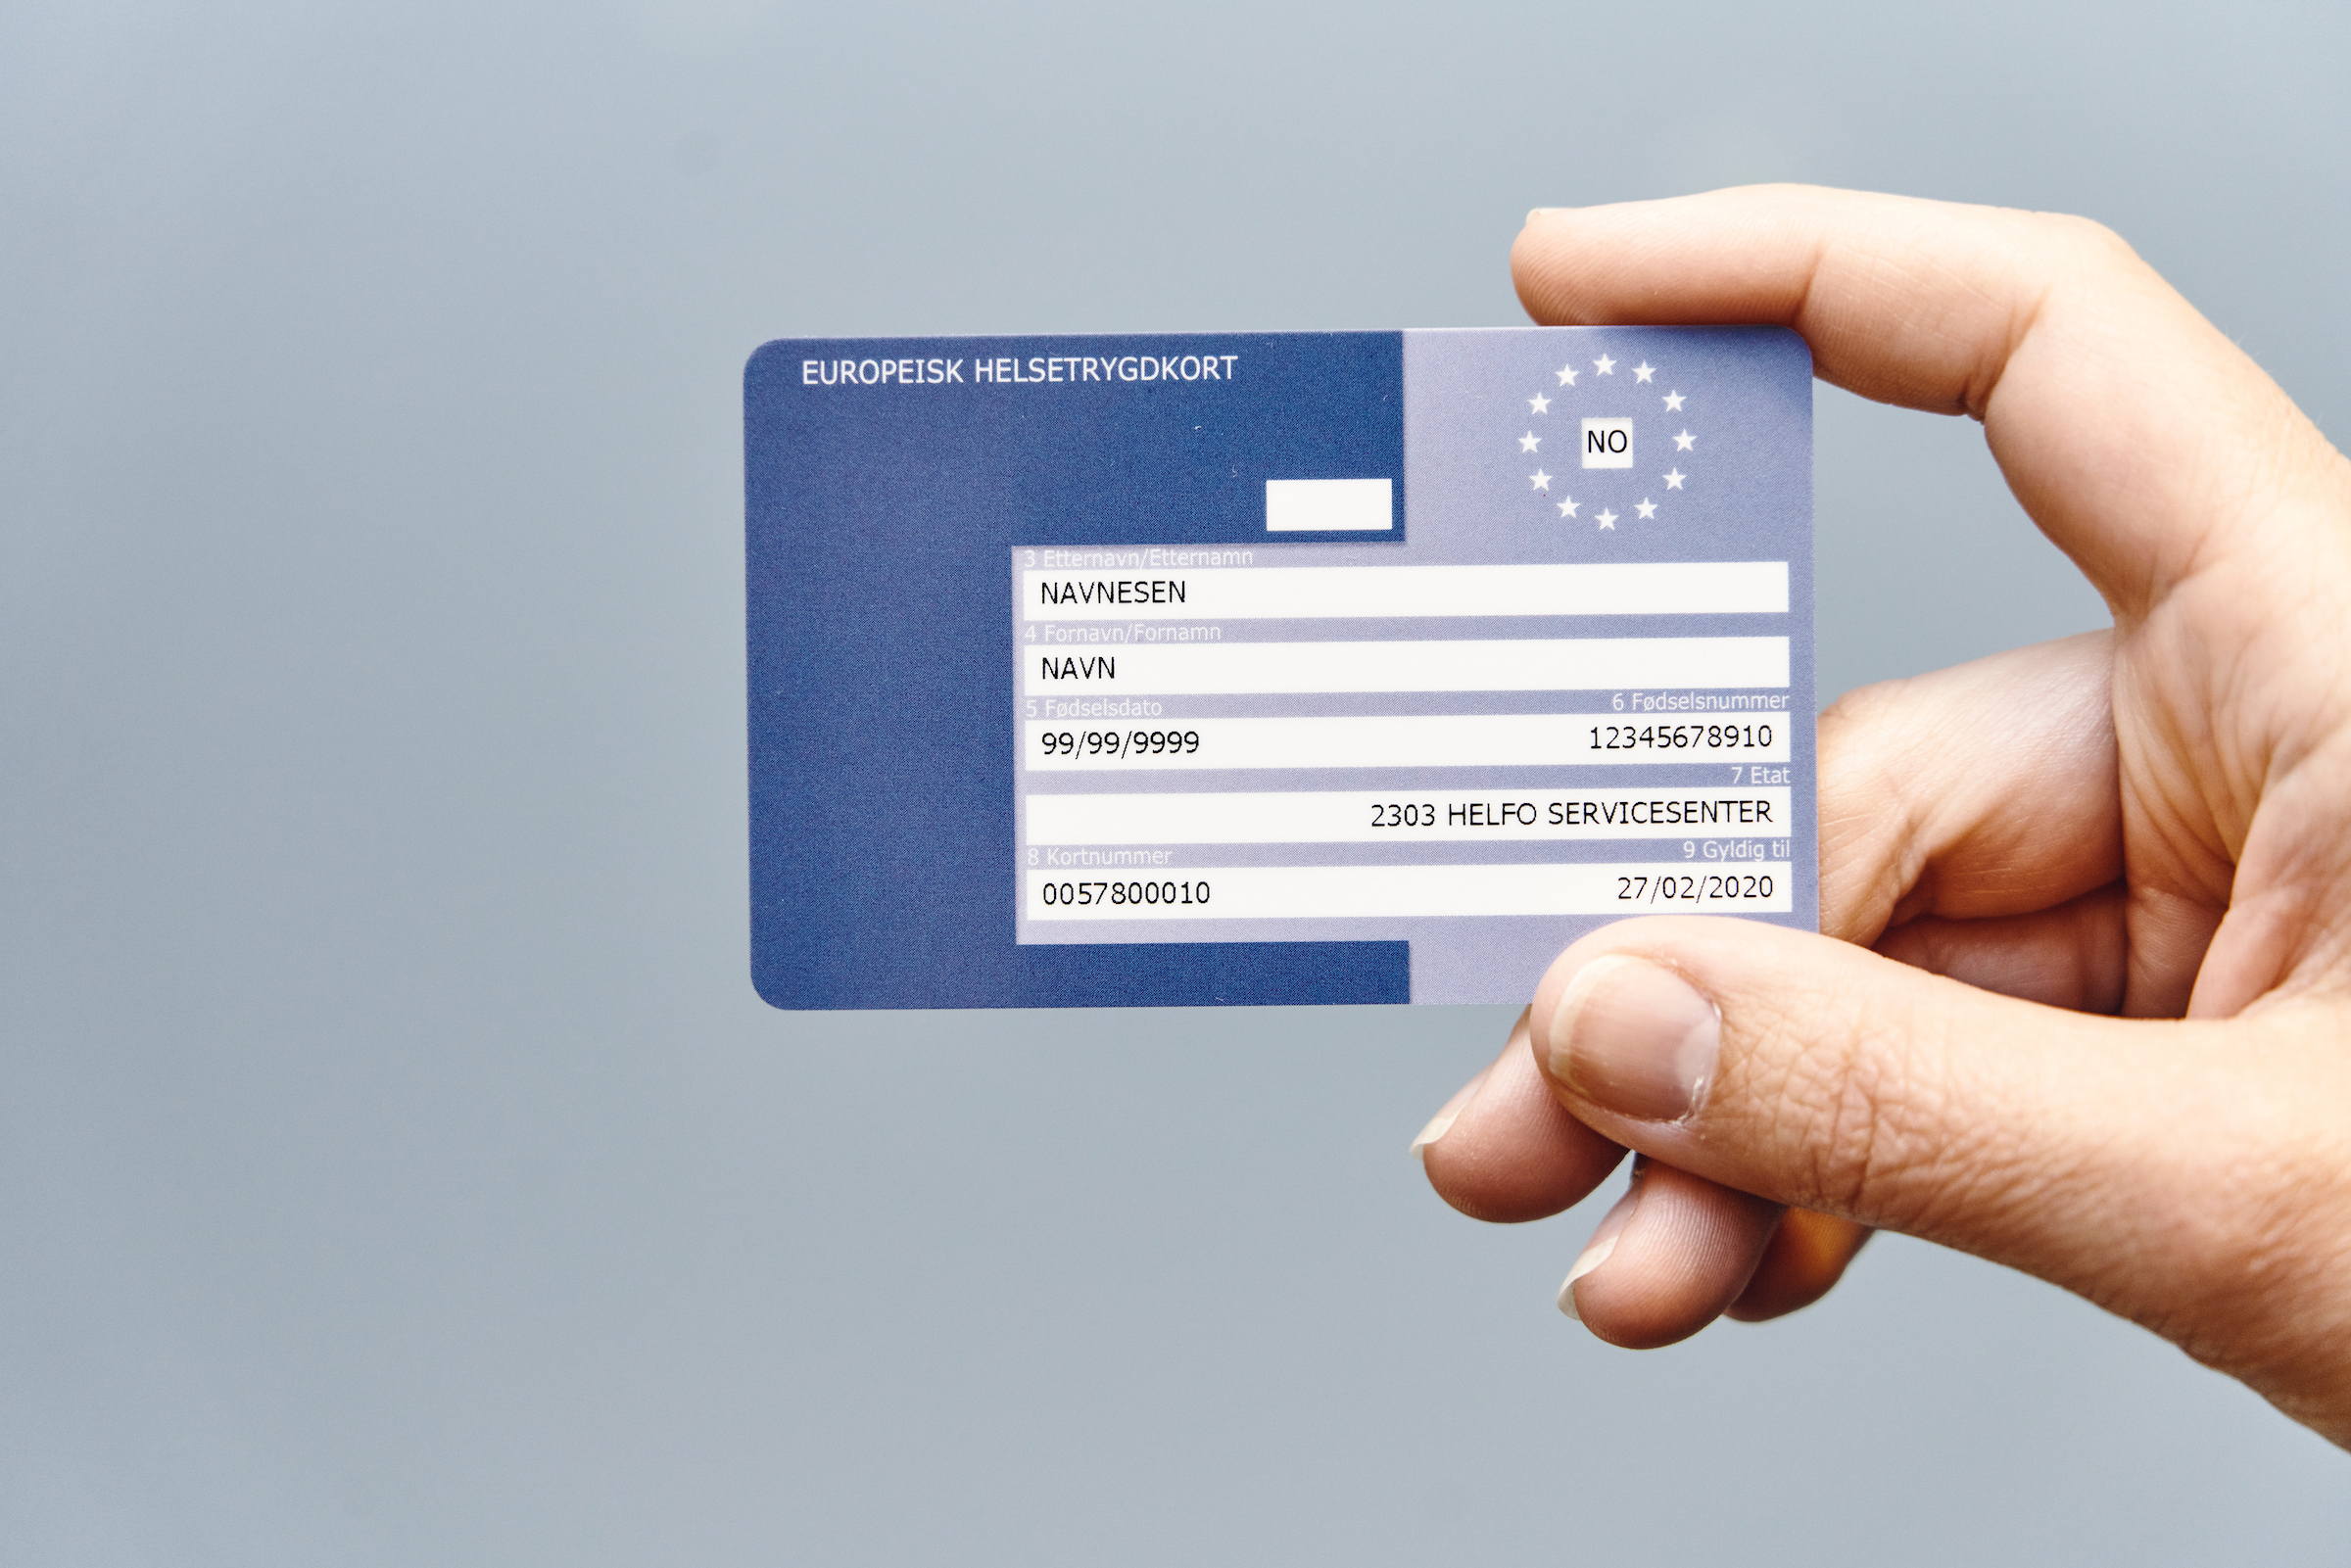 Picture of a European Health Insurance Card.